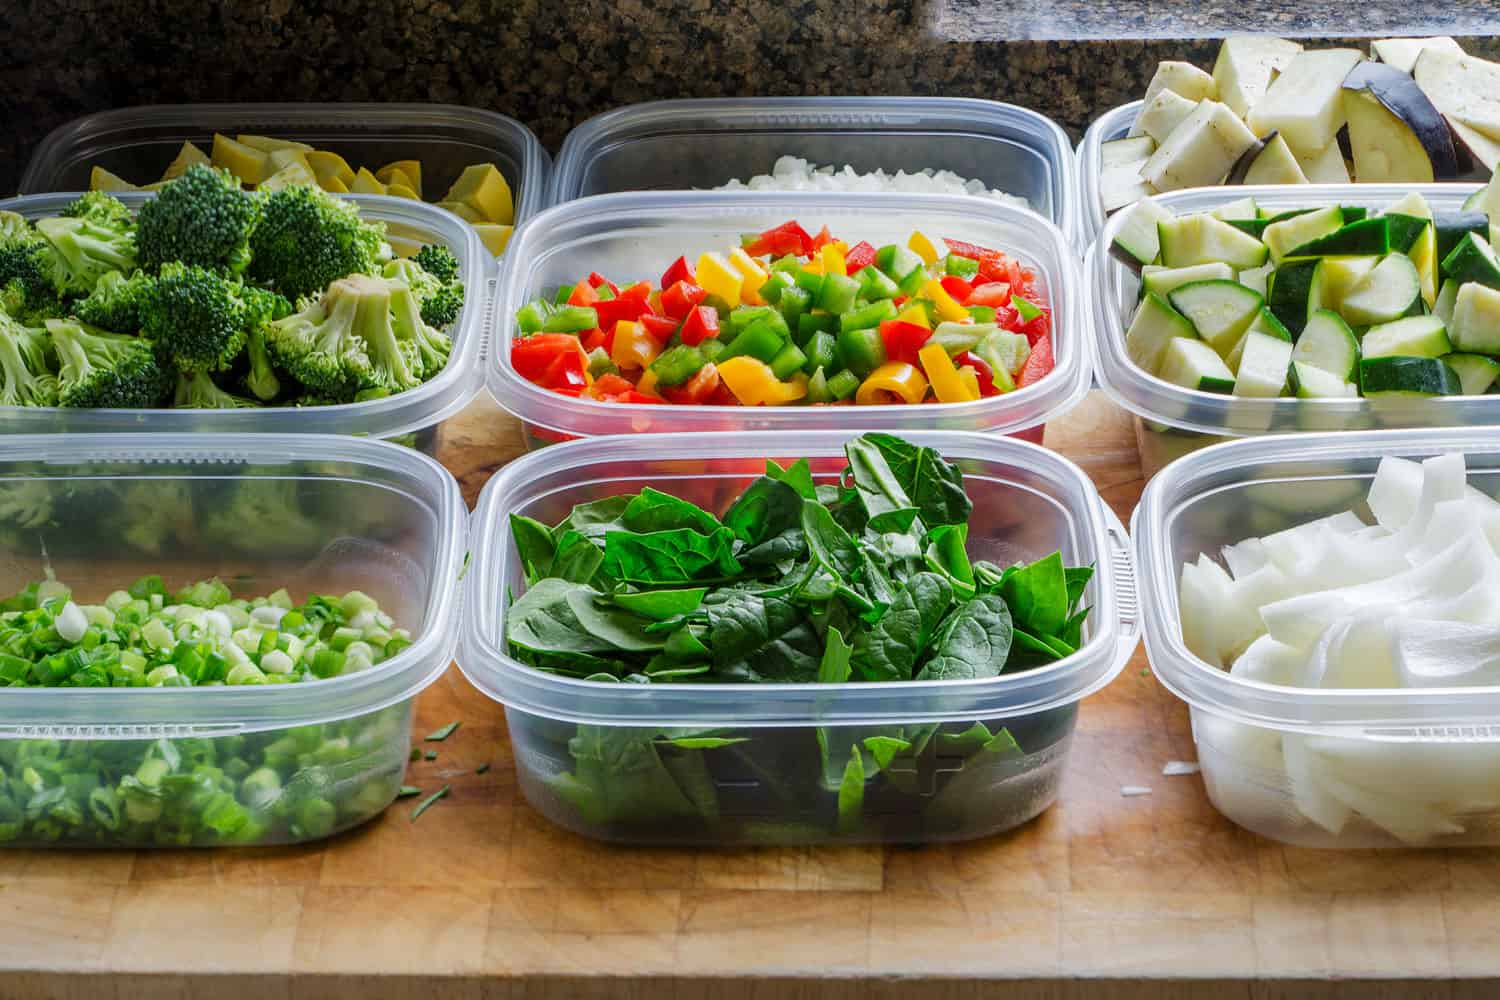 Chopped vegetables in plastic containers